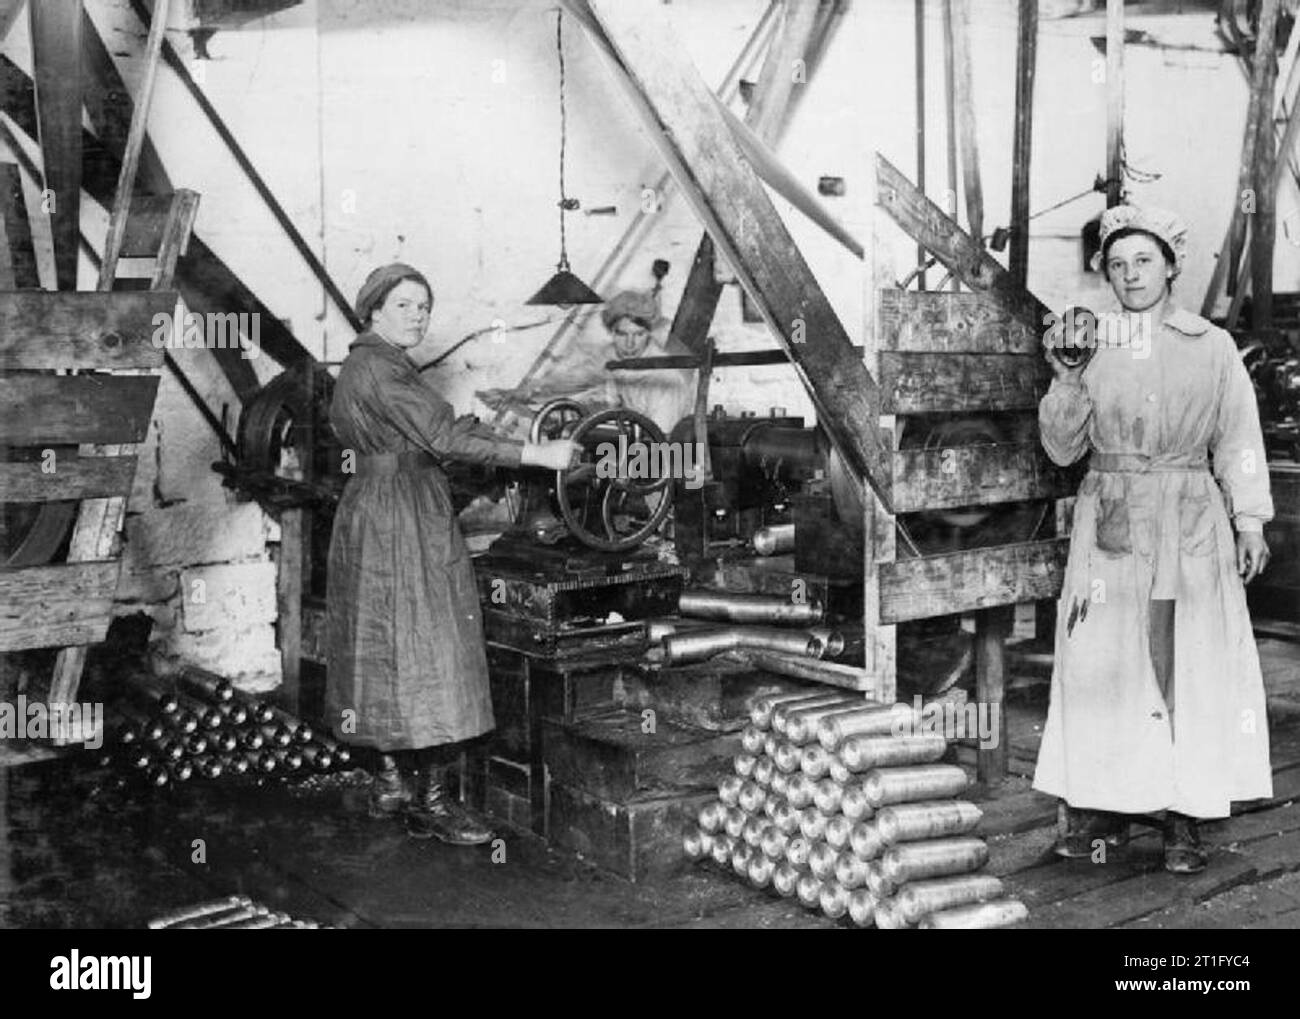 Industry during the First World War Female munitions workers operating lathes in a British shell factory during the First World War. Stock Photo